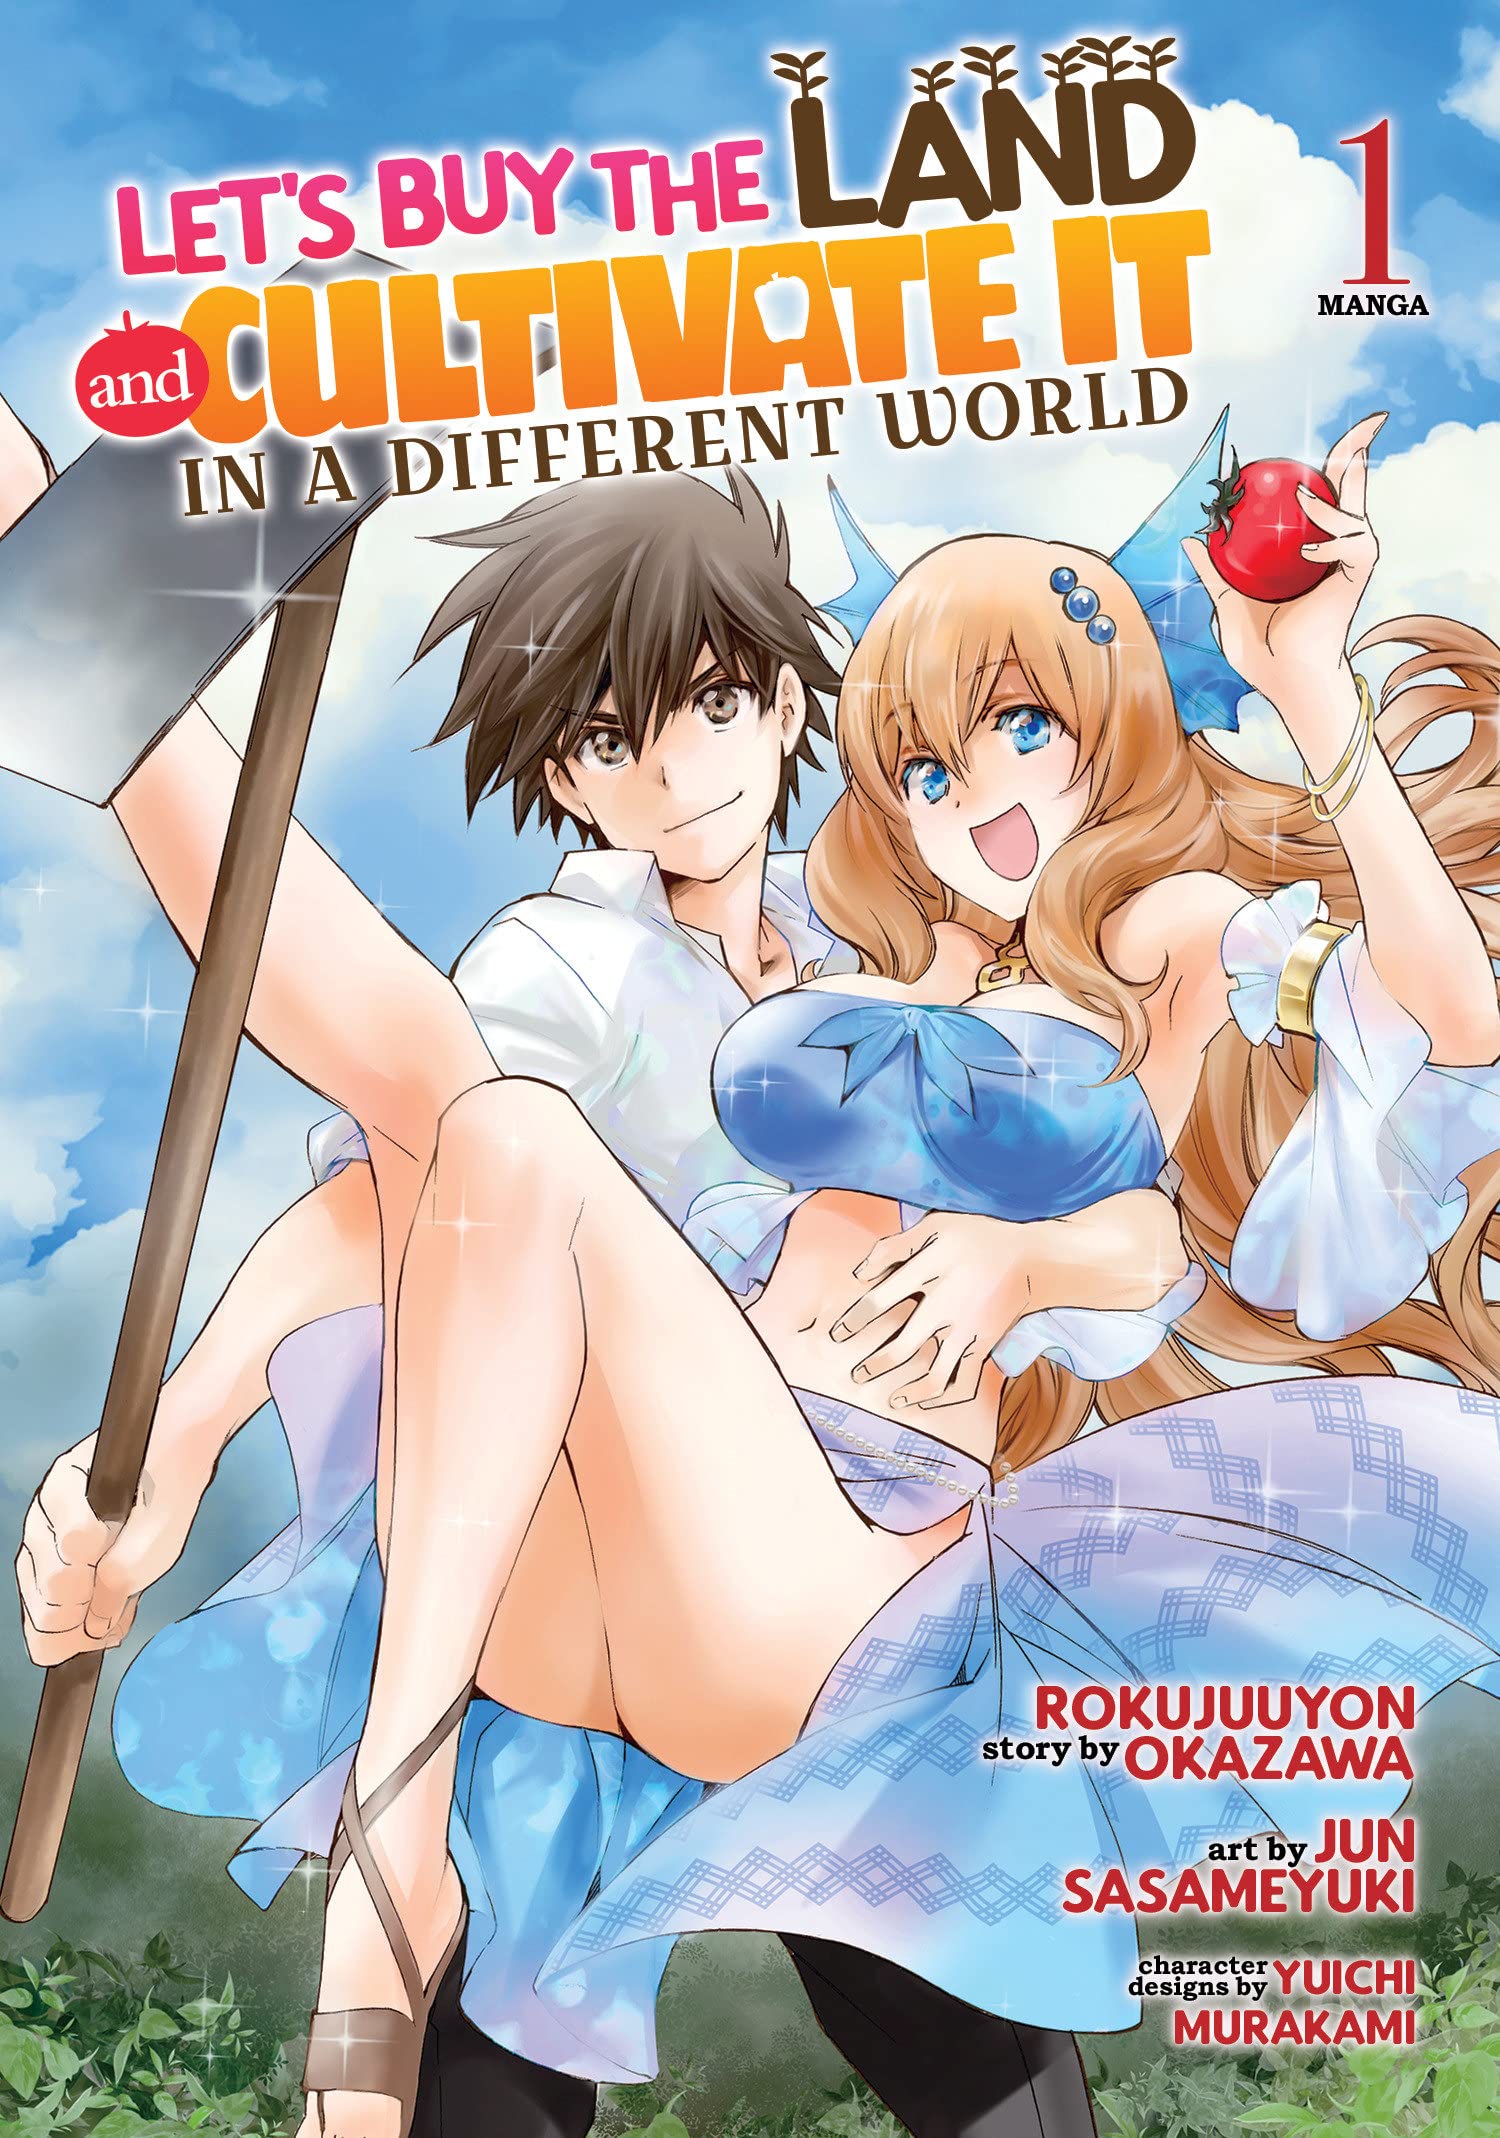 Let's Buy the Land and Cultivate It in a Different World (Manga) Vol. 01